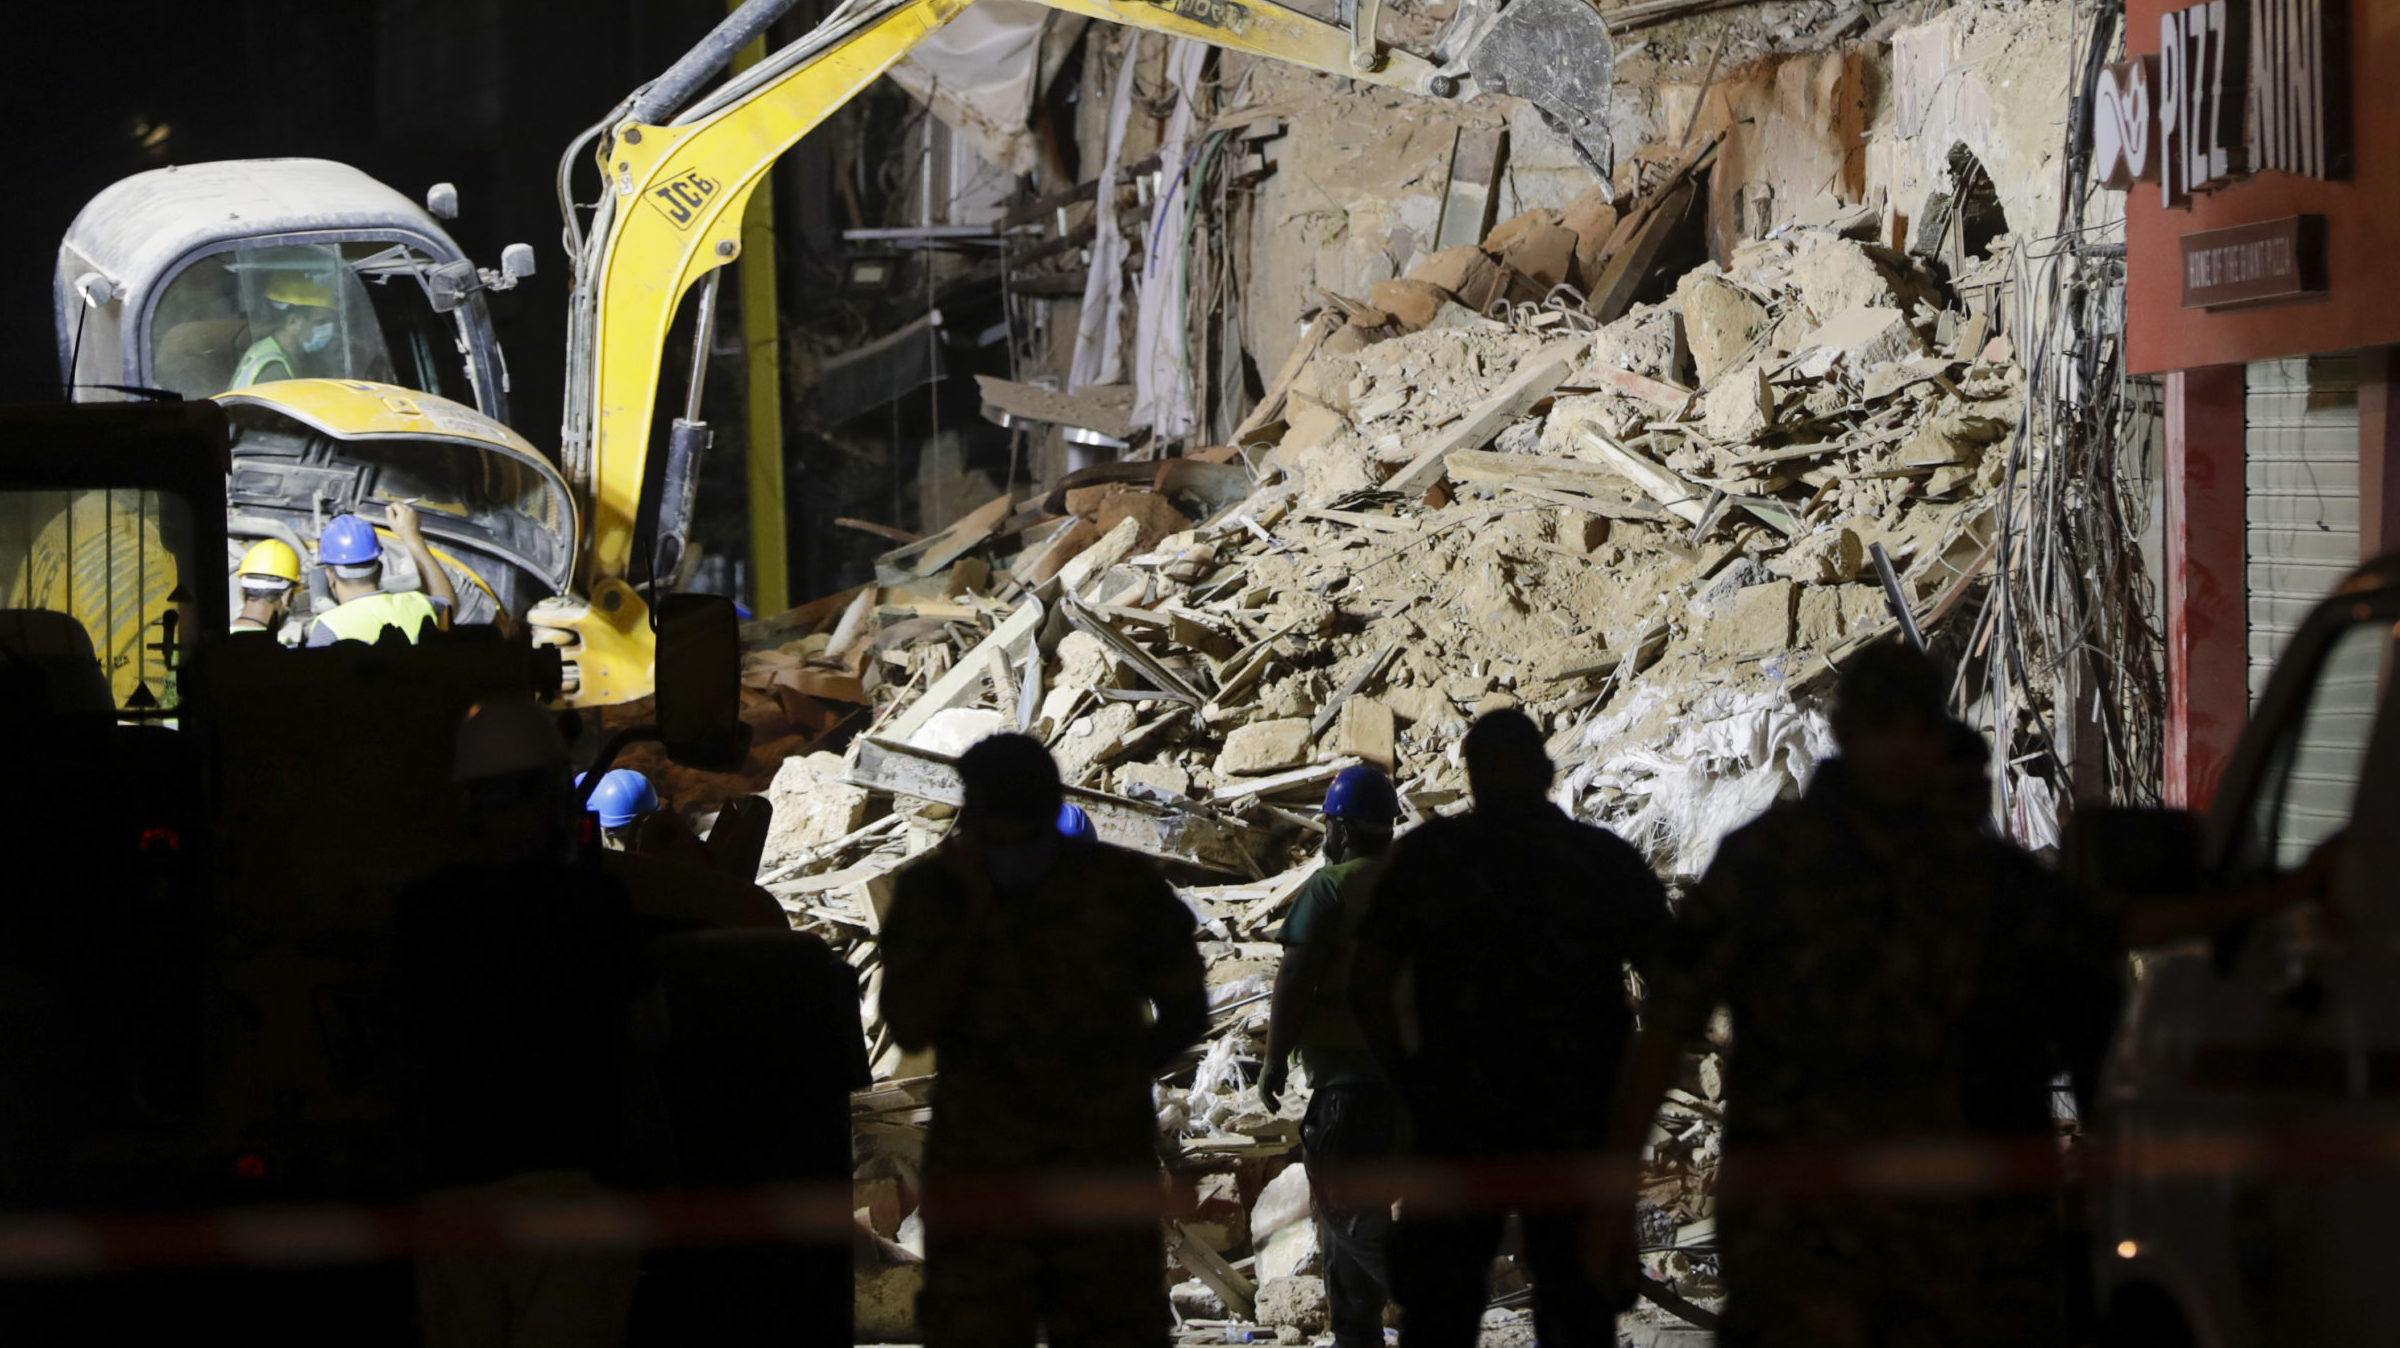 No More Signs of Life in Beirut Building Rubble